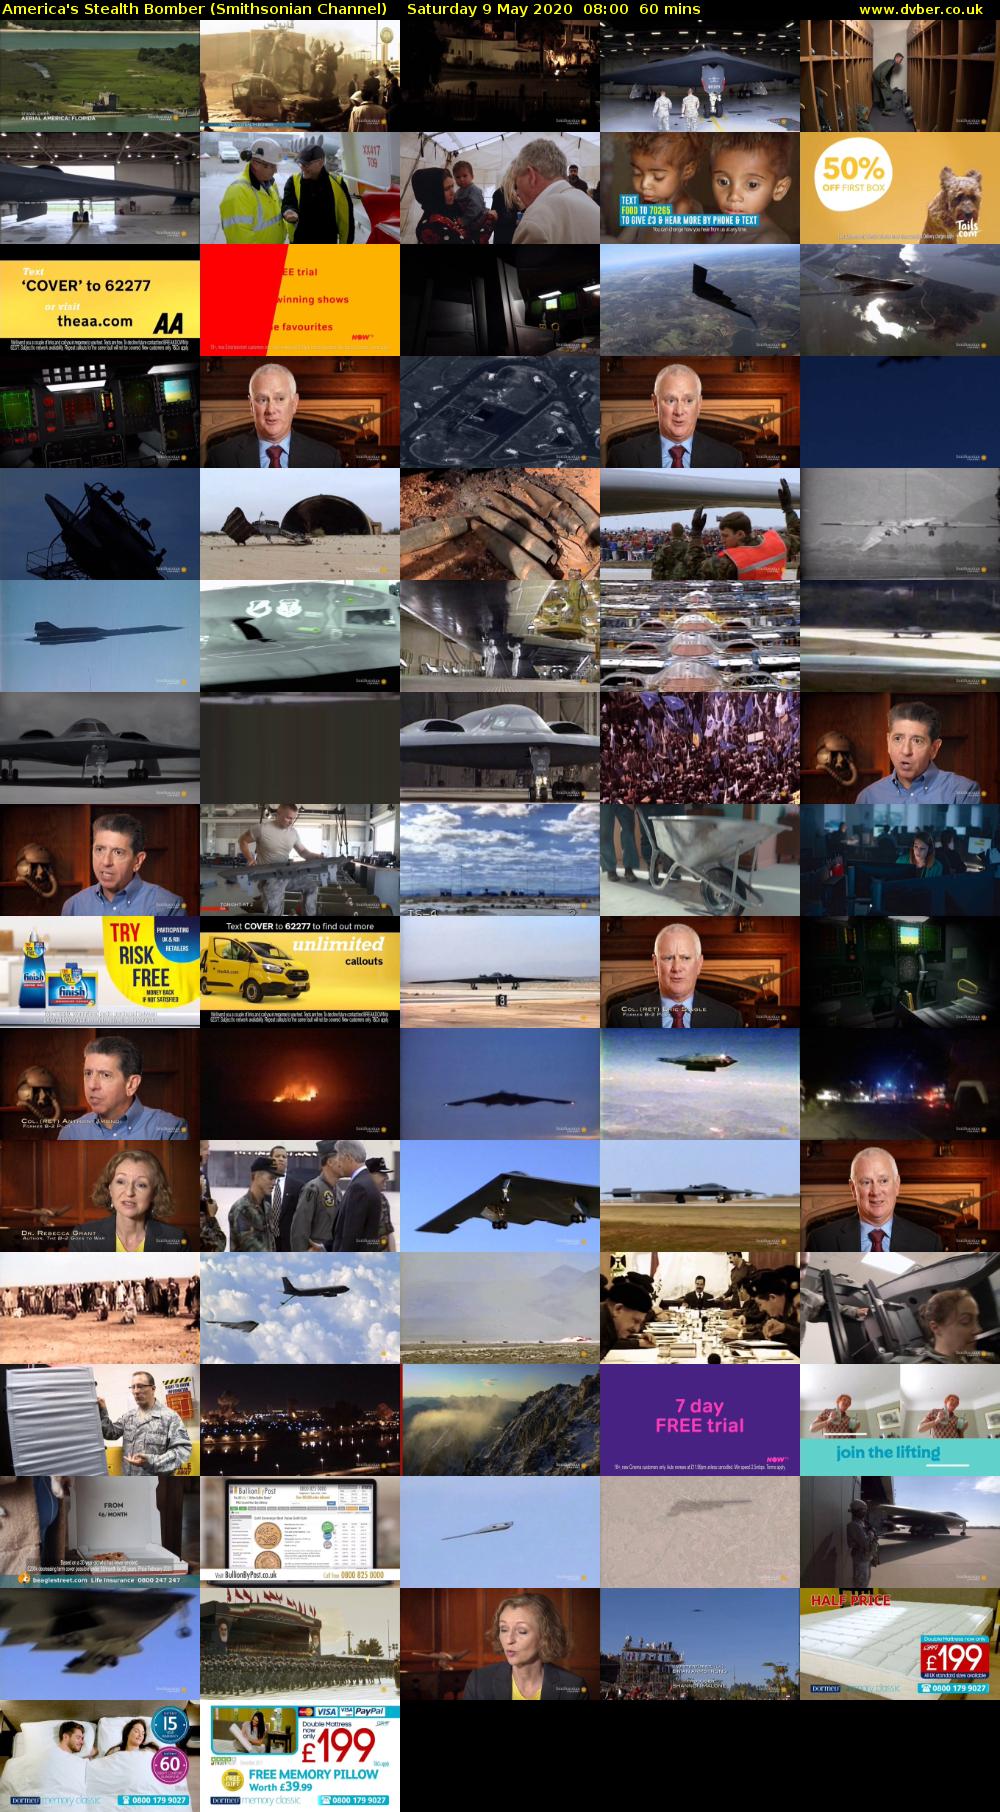 America's Stealth Bomber (Smithsonian Channel) Saturday 9 May 2020 08:00 - 09:00